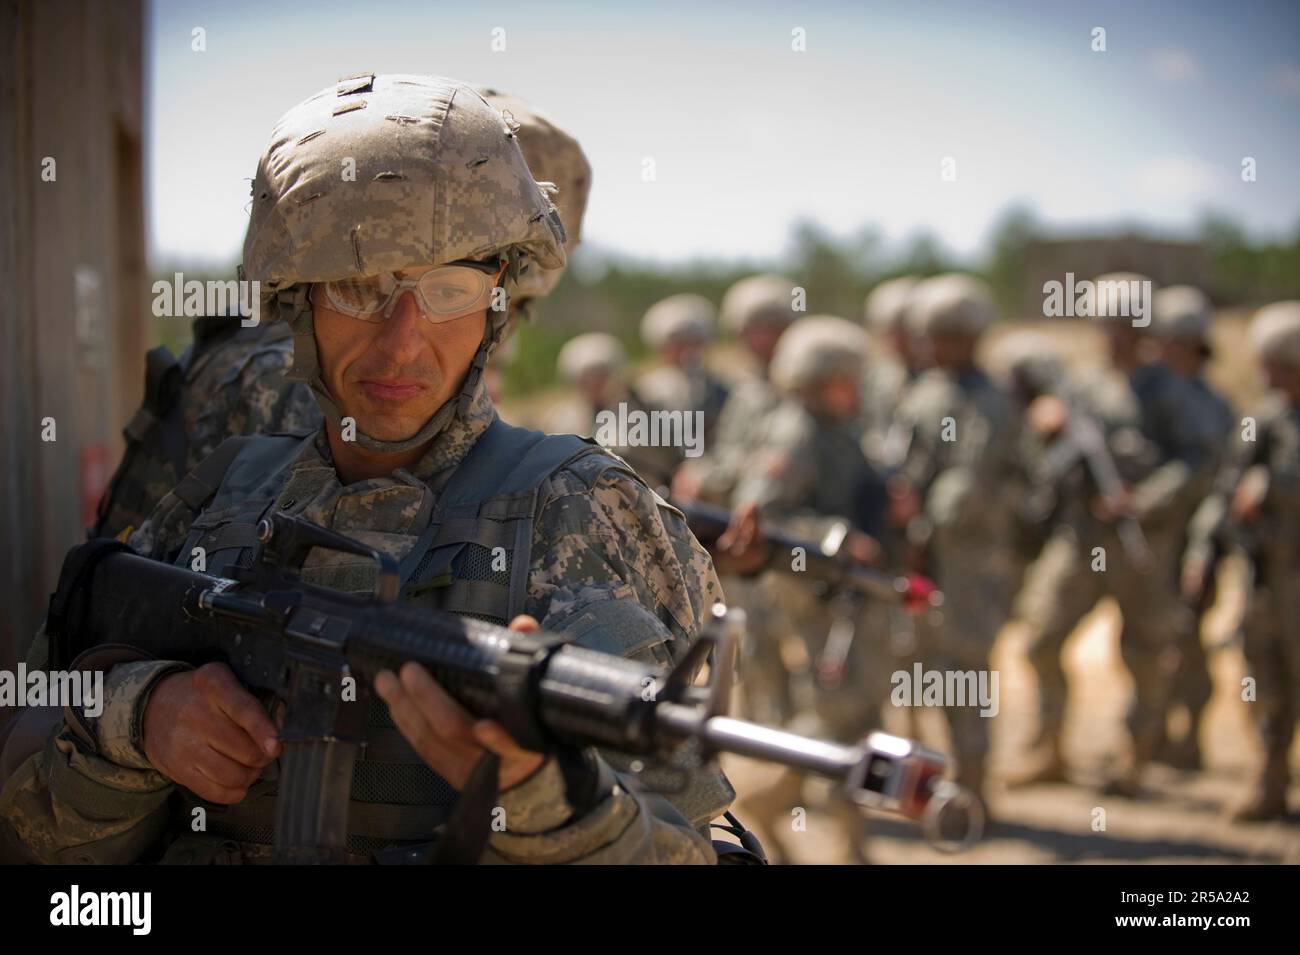 A soldier basic training provides rear security during close quarters combat training. Stock Photo